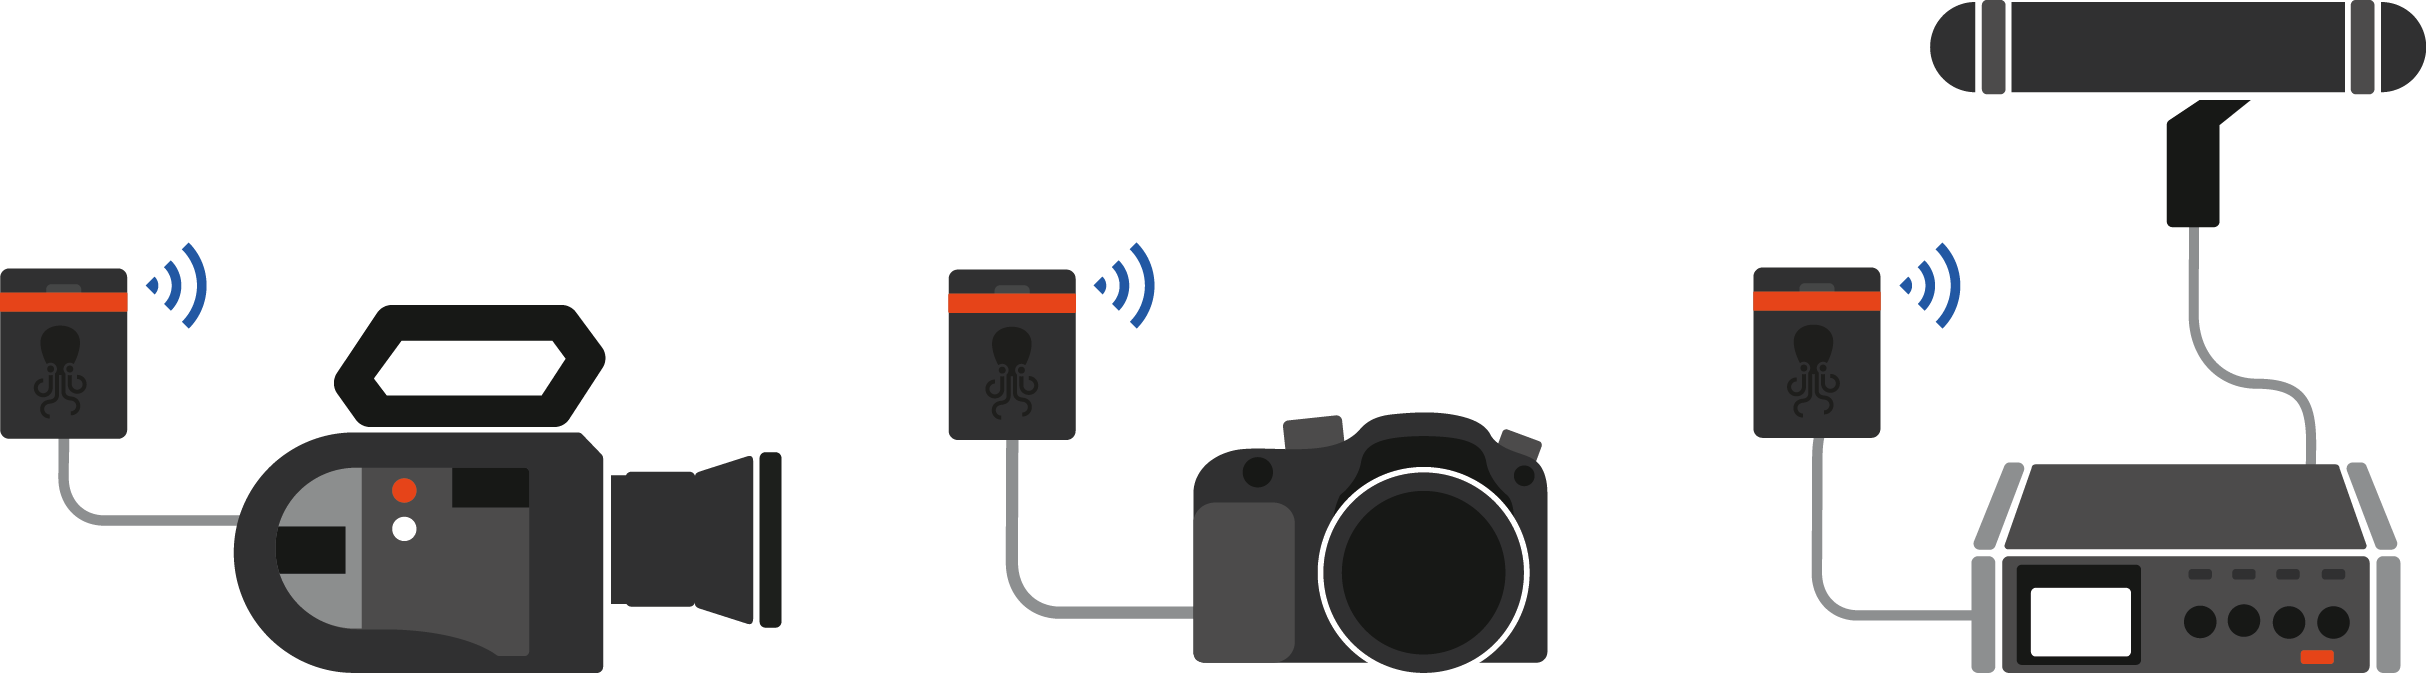 Illustration connection to devices